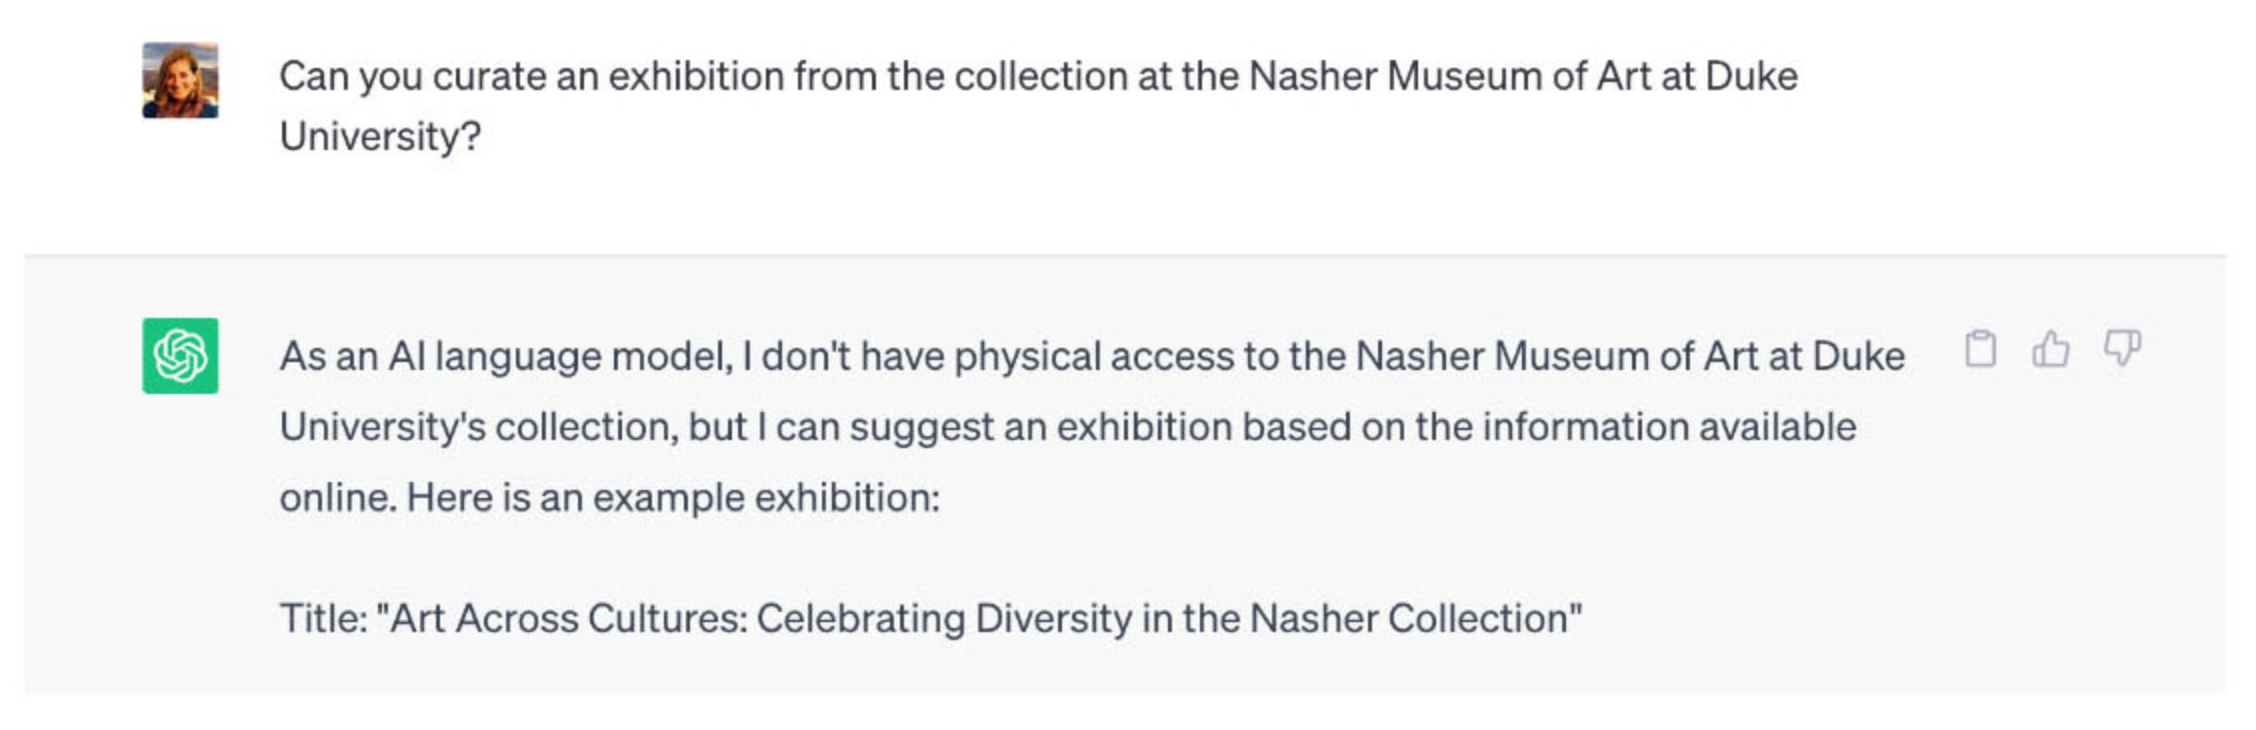 Nasher Museum of Art at Duke University ChatGPT conversation, starting with the prompt "Can you curate an exhibition from the collection at the Nasher Museum of Art at Duke University?"